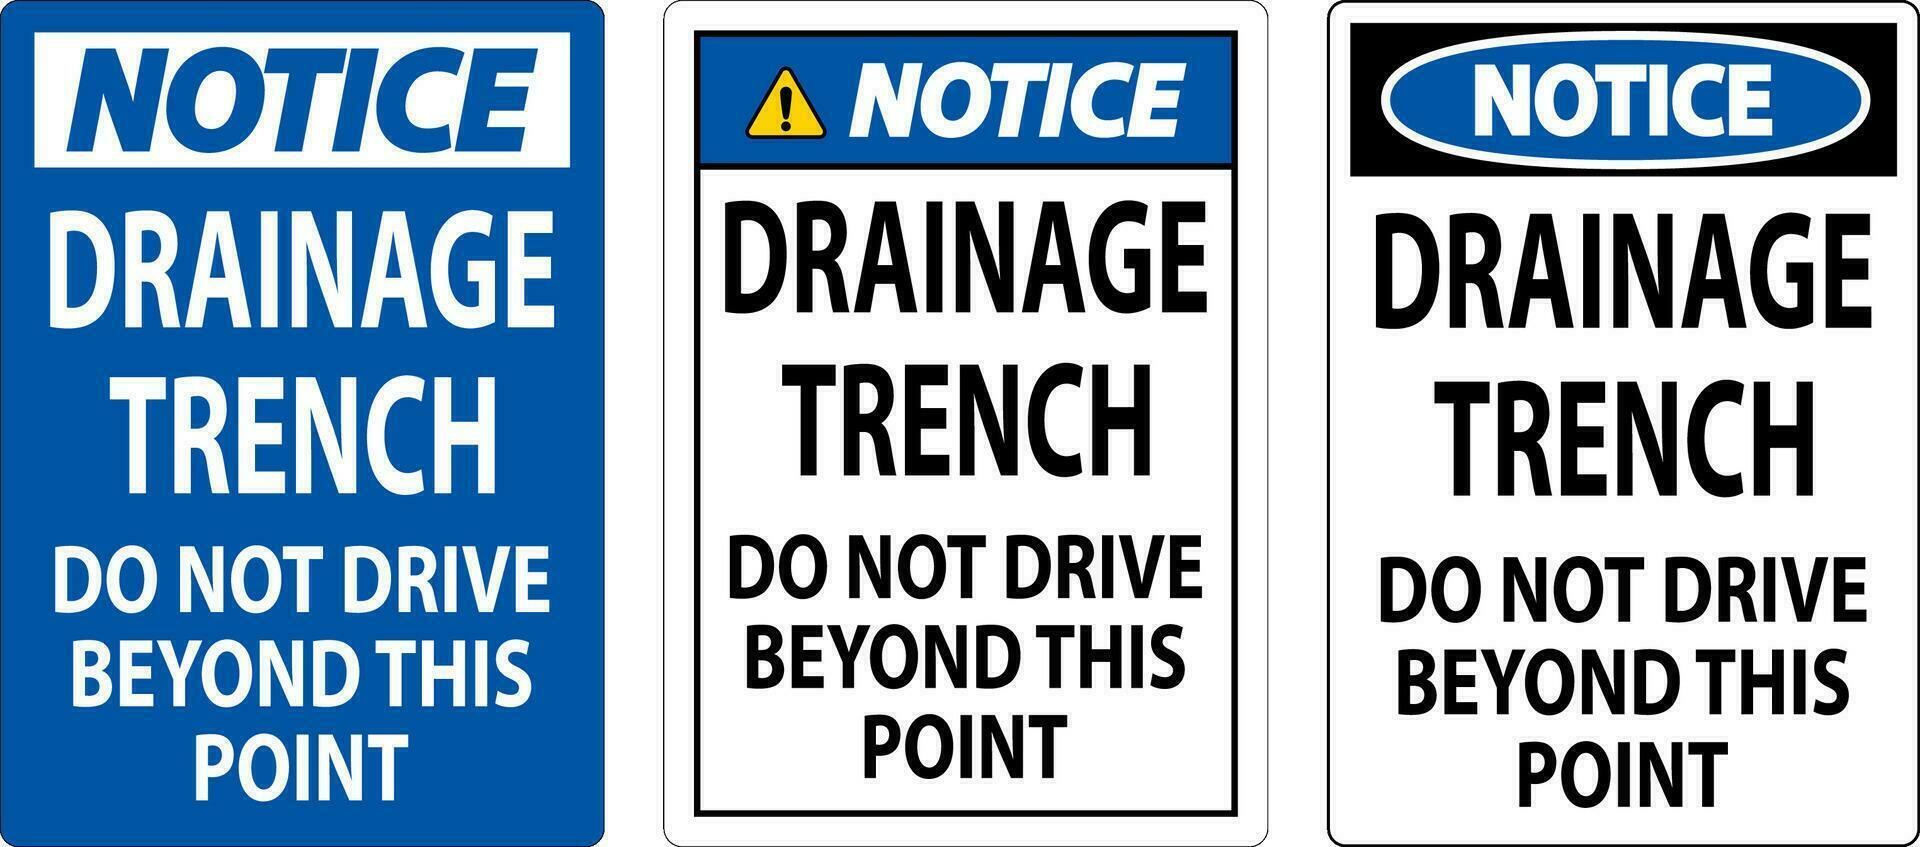 Notice Sign Drainage Trench - Do Not Drive Beyond This Point vector